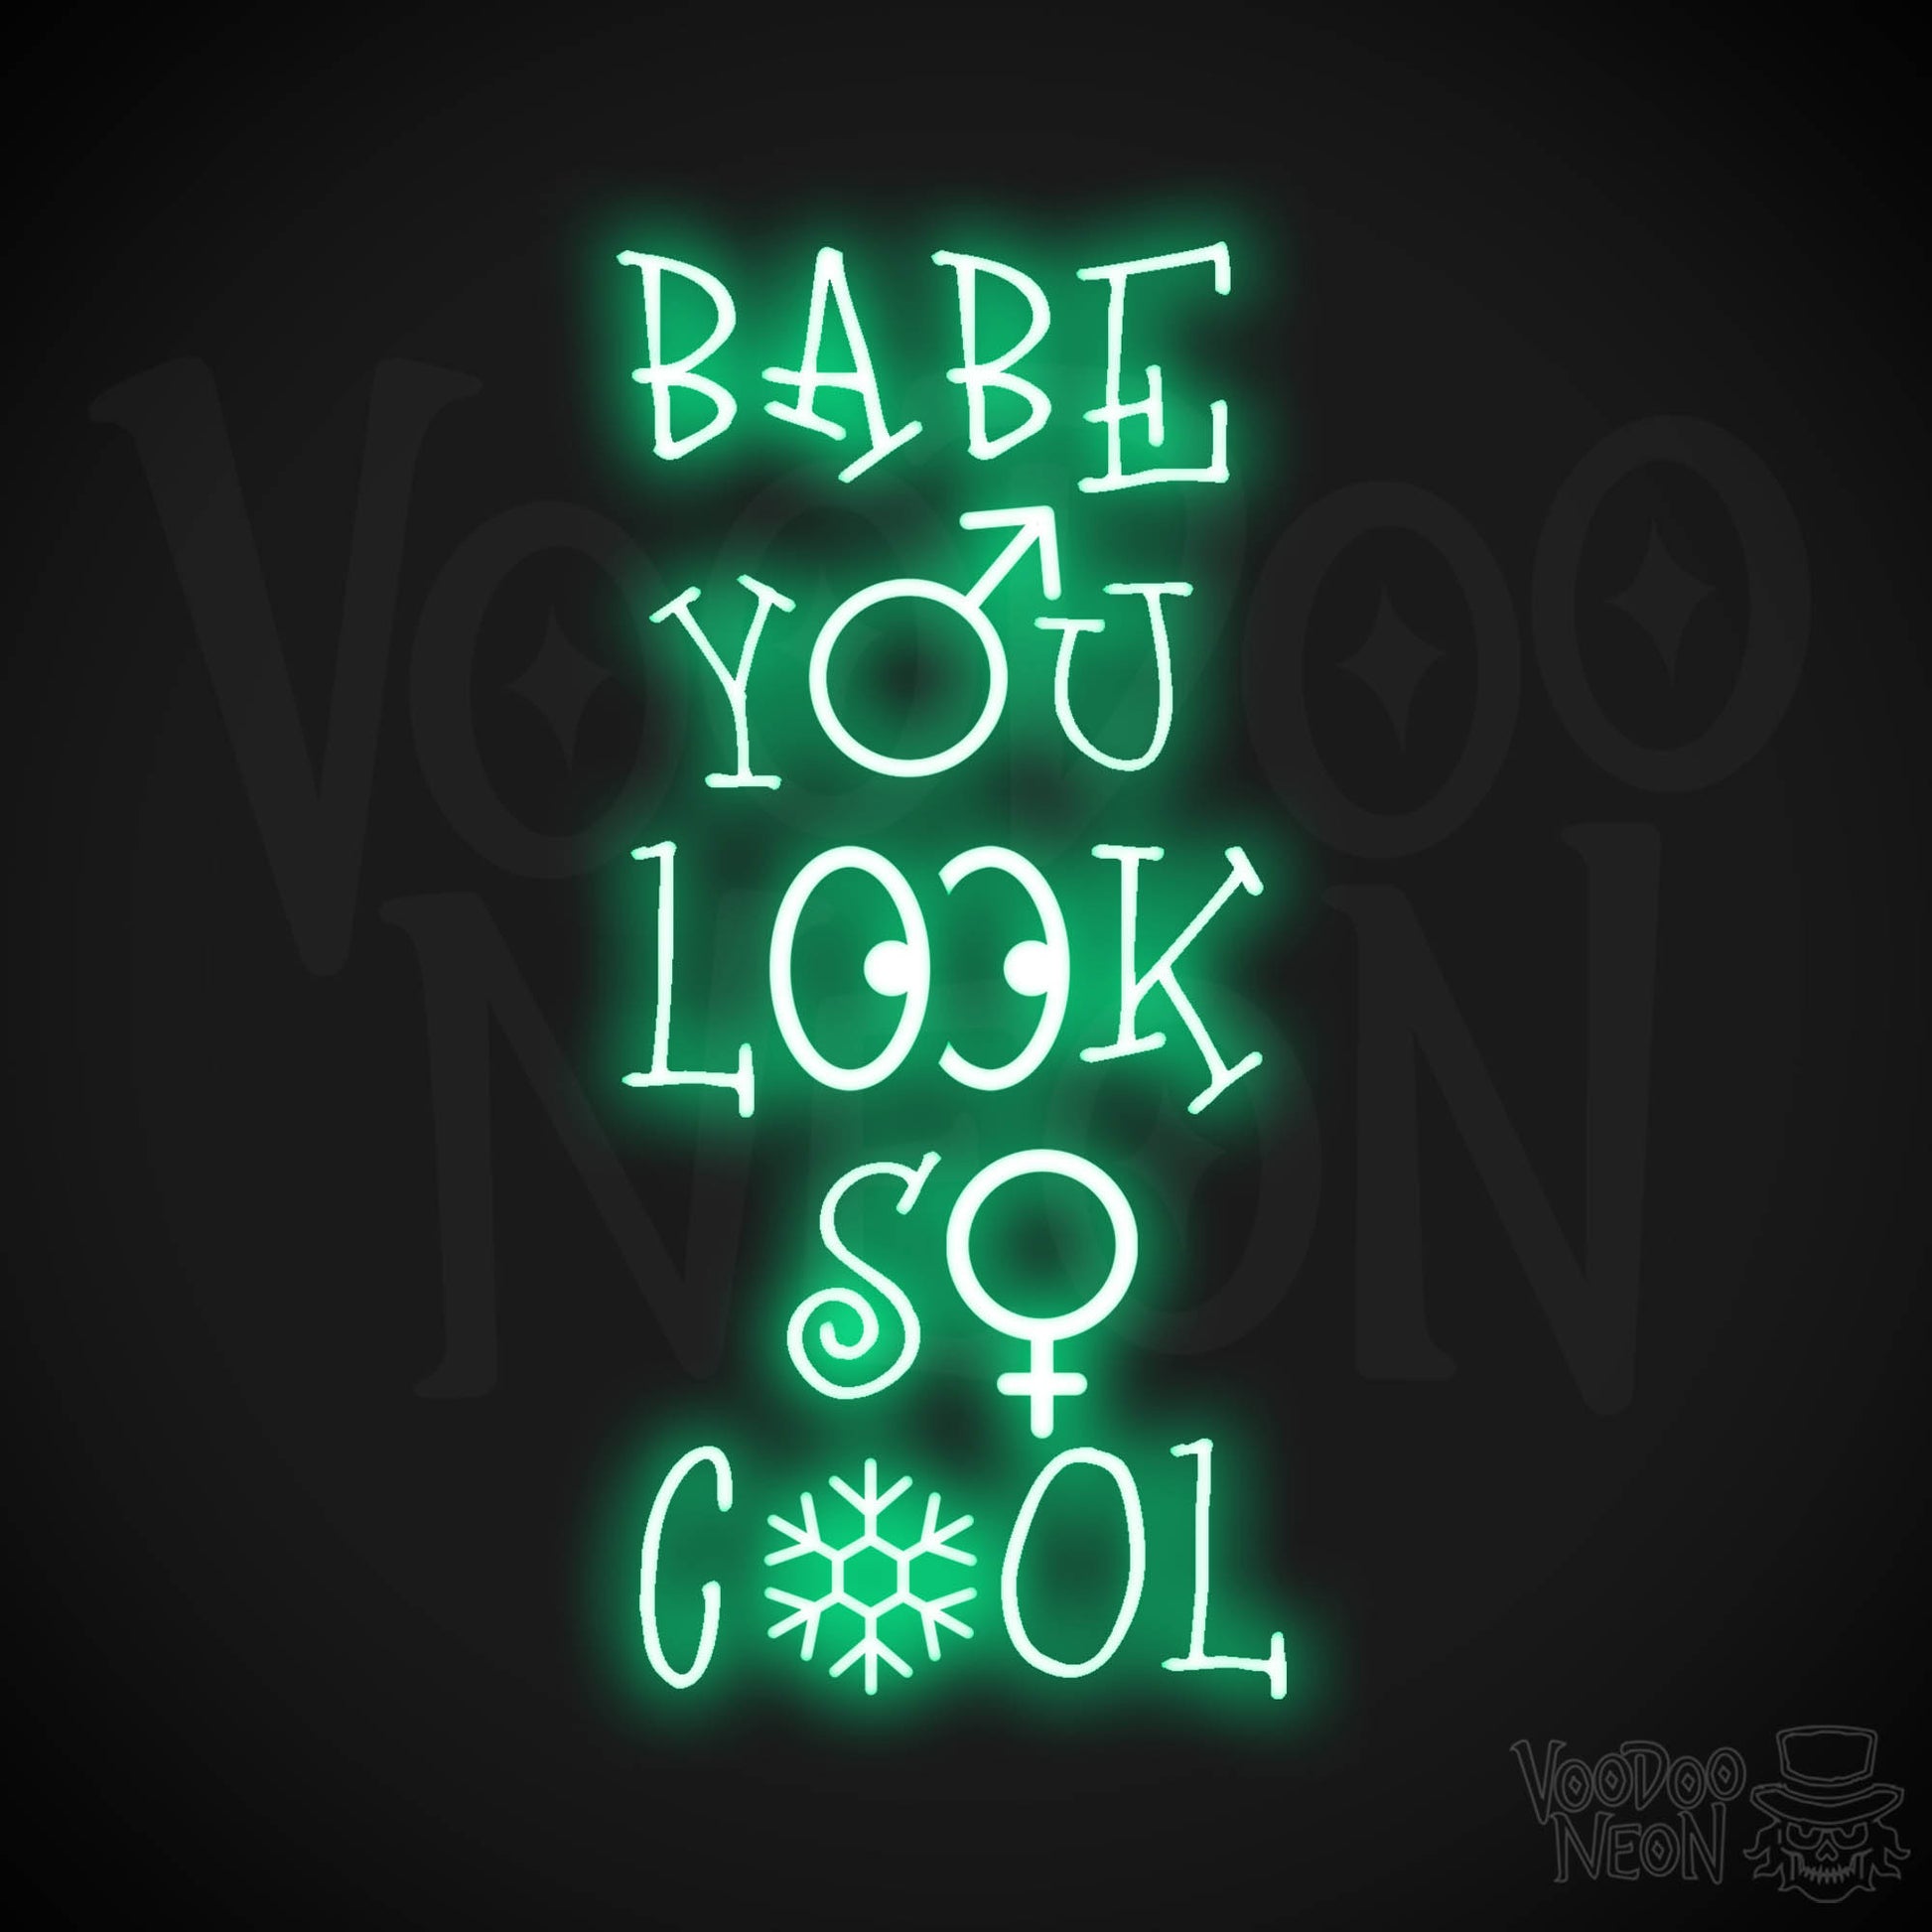 Babe You Look So Cool Neon Sign - LED Wall Art - Color Green